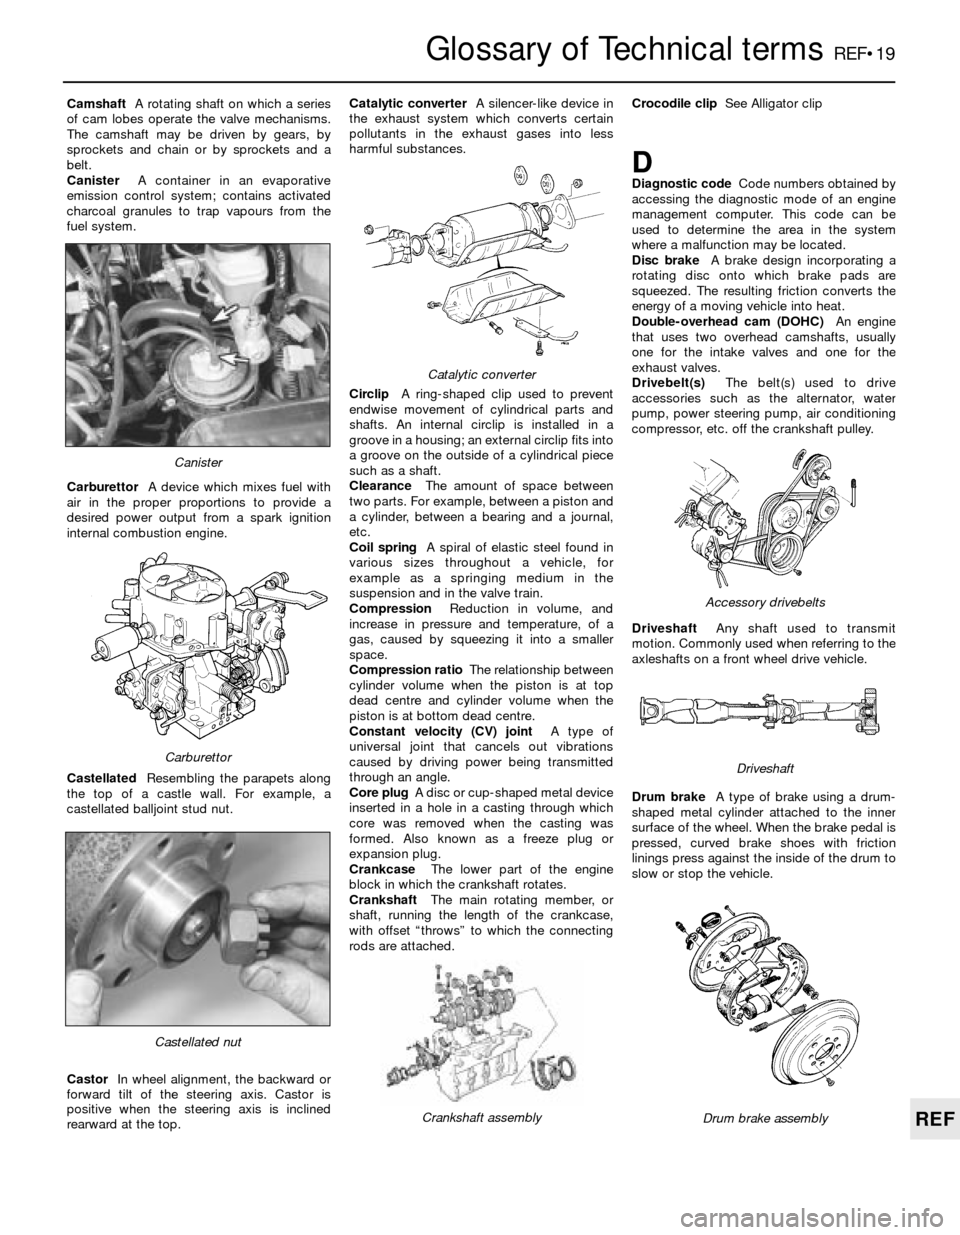 FORD SIERRA 1990 2.G Reference User Guide Glossary of Technical termsREF•19
REF
CamshaftA rotating shaft on which a series
of cam lobes operate the valve mechanisms.
The camshaft may be driven by gears, by
sprockets and chain or by sprocket